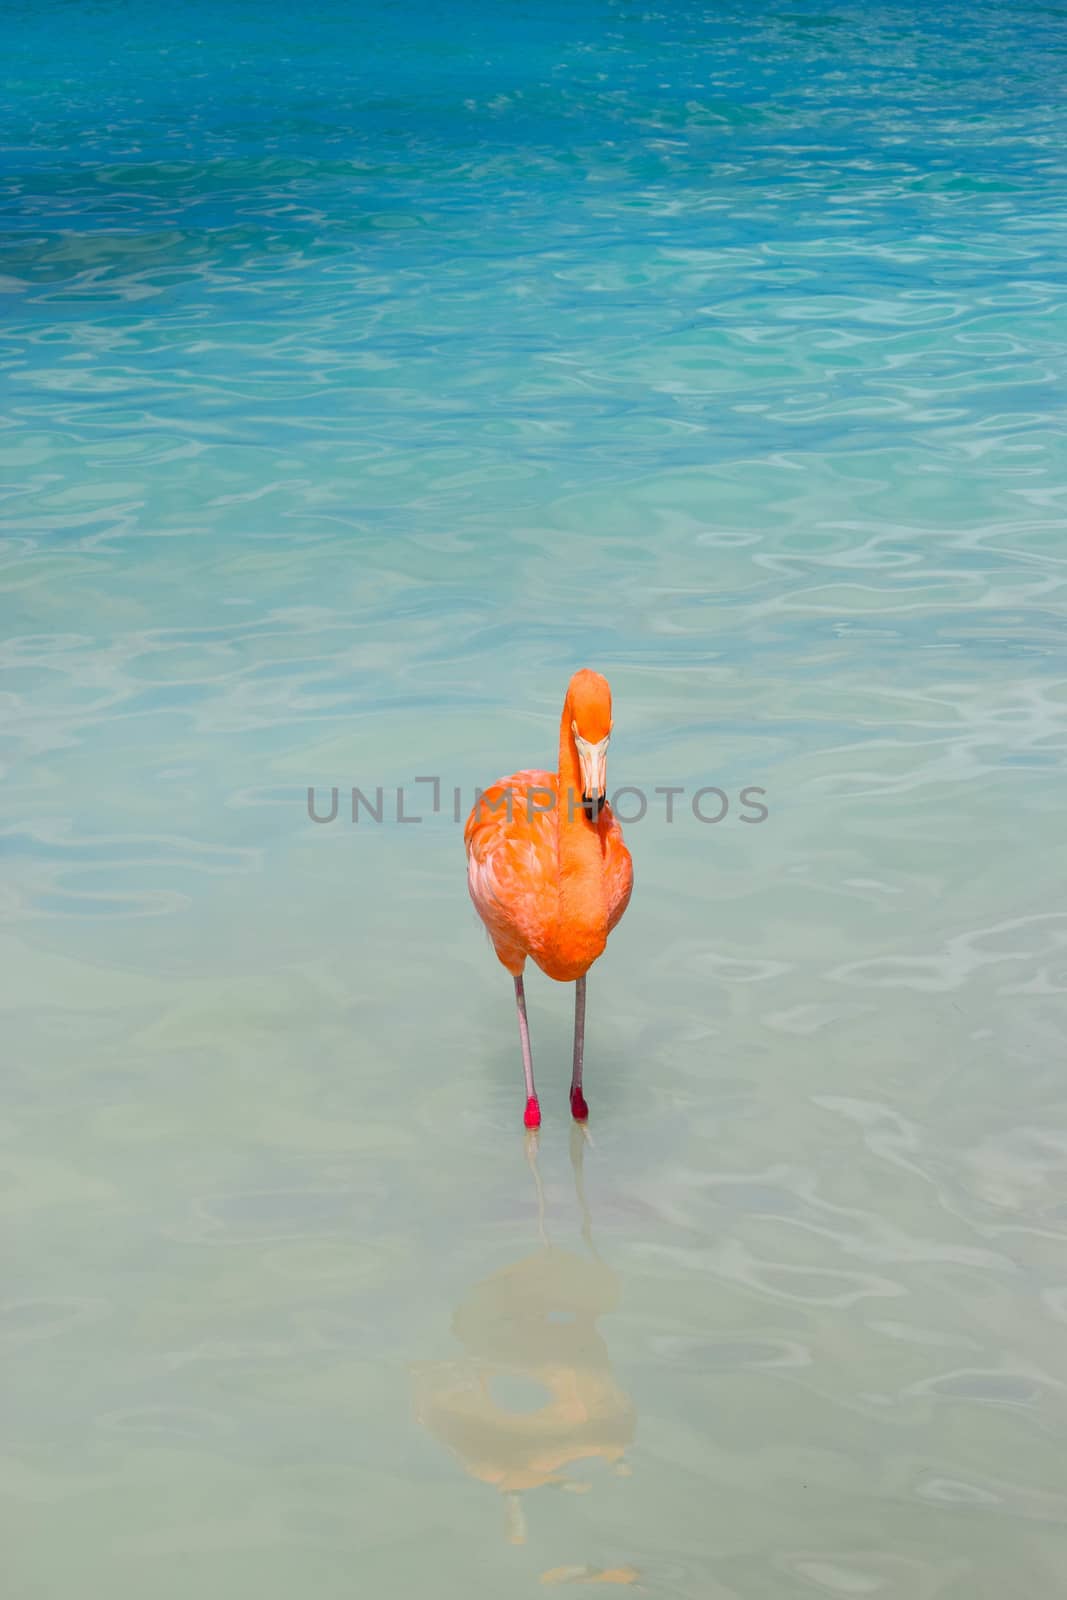 Aruba, Renaissance Island, Caribbean Sea. Sunny beach with white sand, coconut palm trees and turquoise sea. Summer vacation, tropical beach and pink flamingos